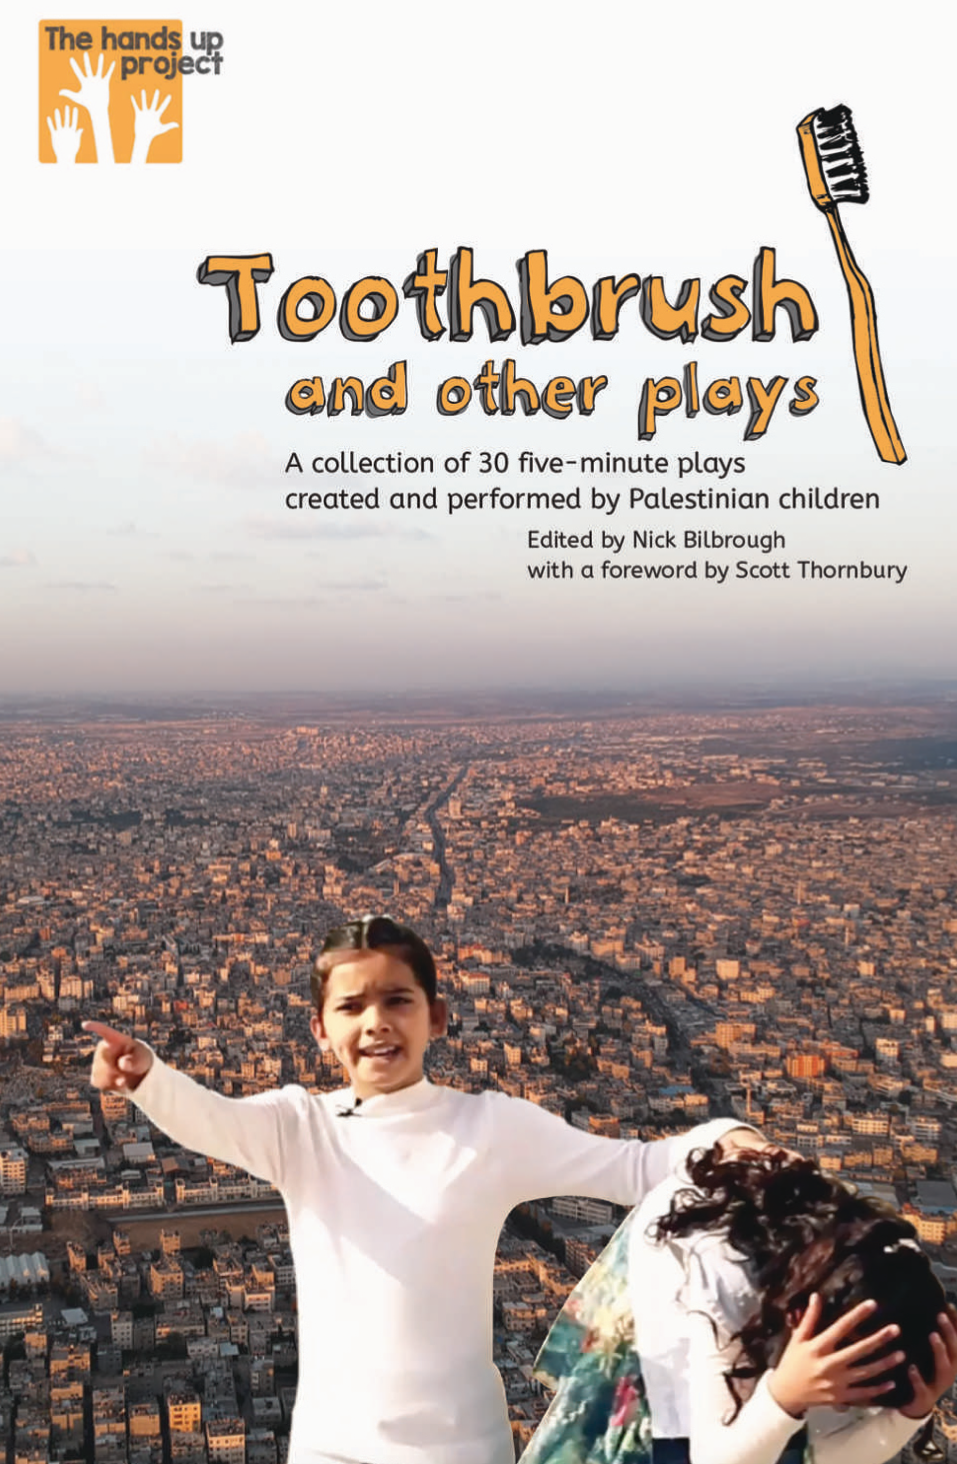 Toothbrush and other plays  (with a foreword by Scott Thornbury)